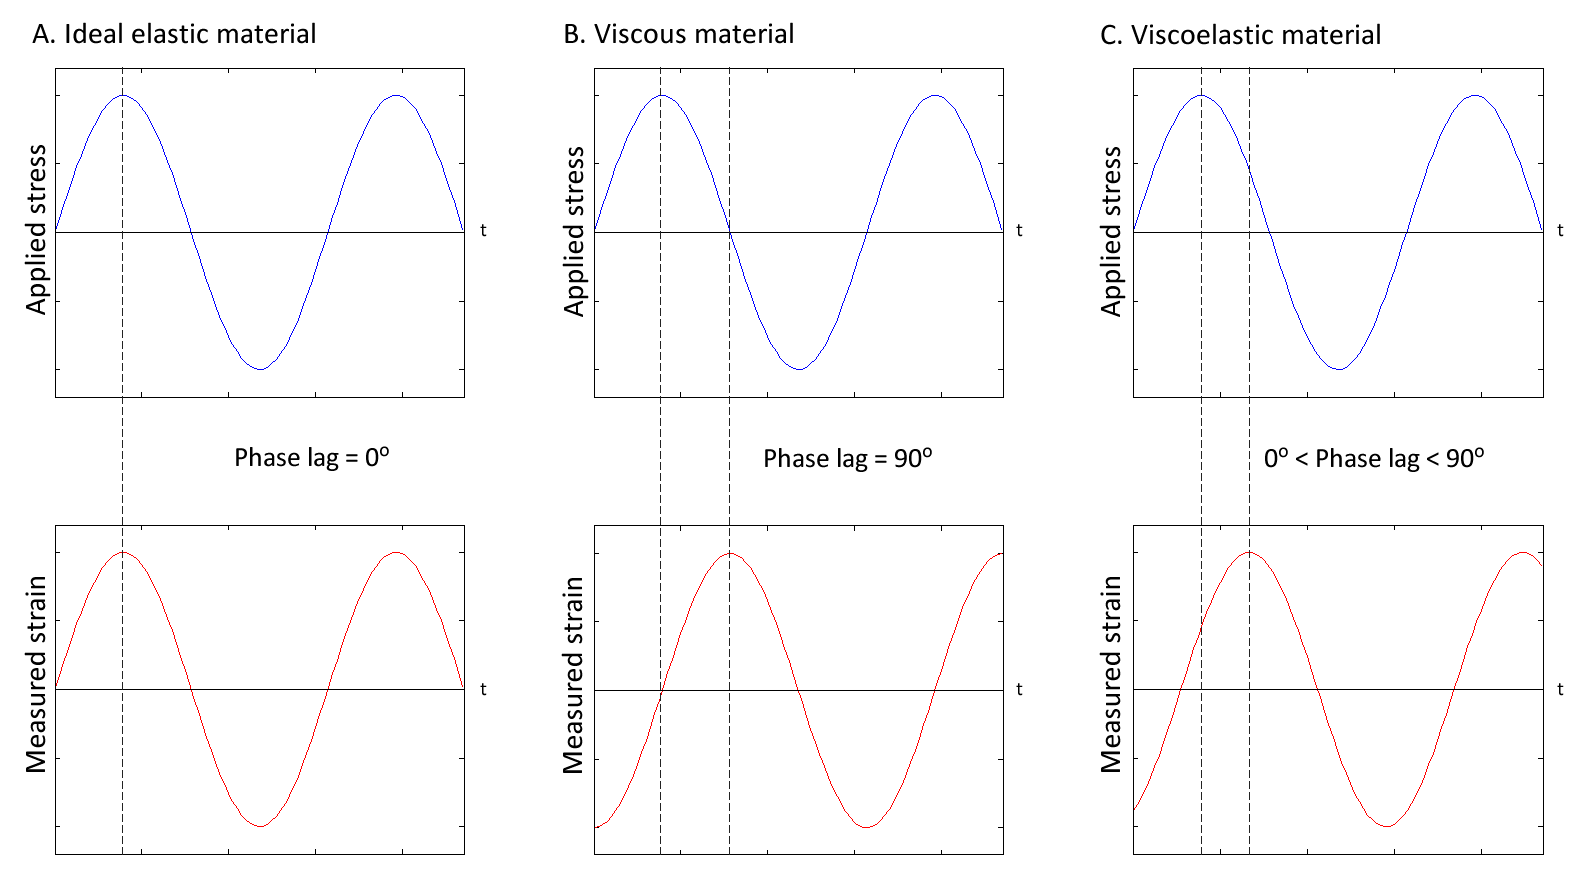 Applied sinusoidal stress versus time (above) aligned with measured stress versus time (below). (a) The applied stress and measured strain are in phase for an ideal elastic material. (b) The stress and strain are 90 degrees out of phase for a purely viscous material. (c) Viscoelastic materials have a phase lag less than 90 degrees